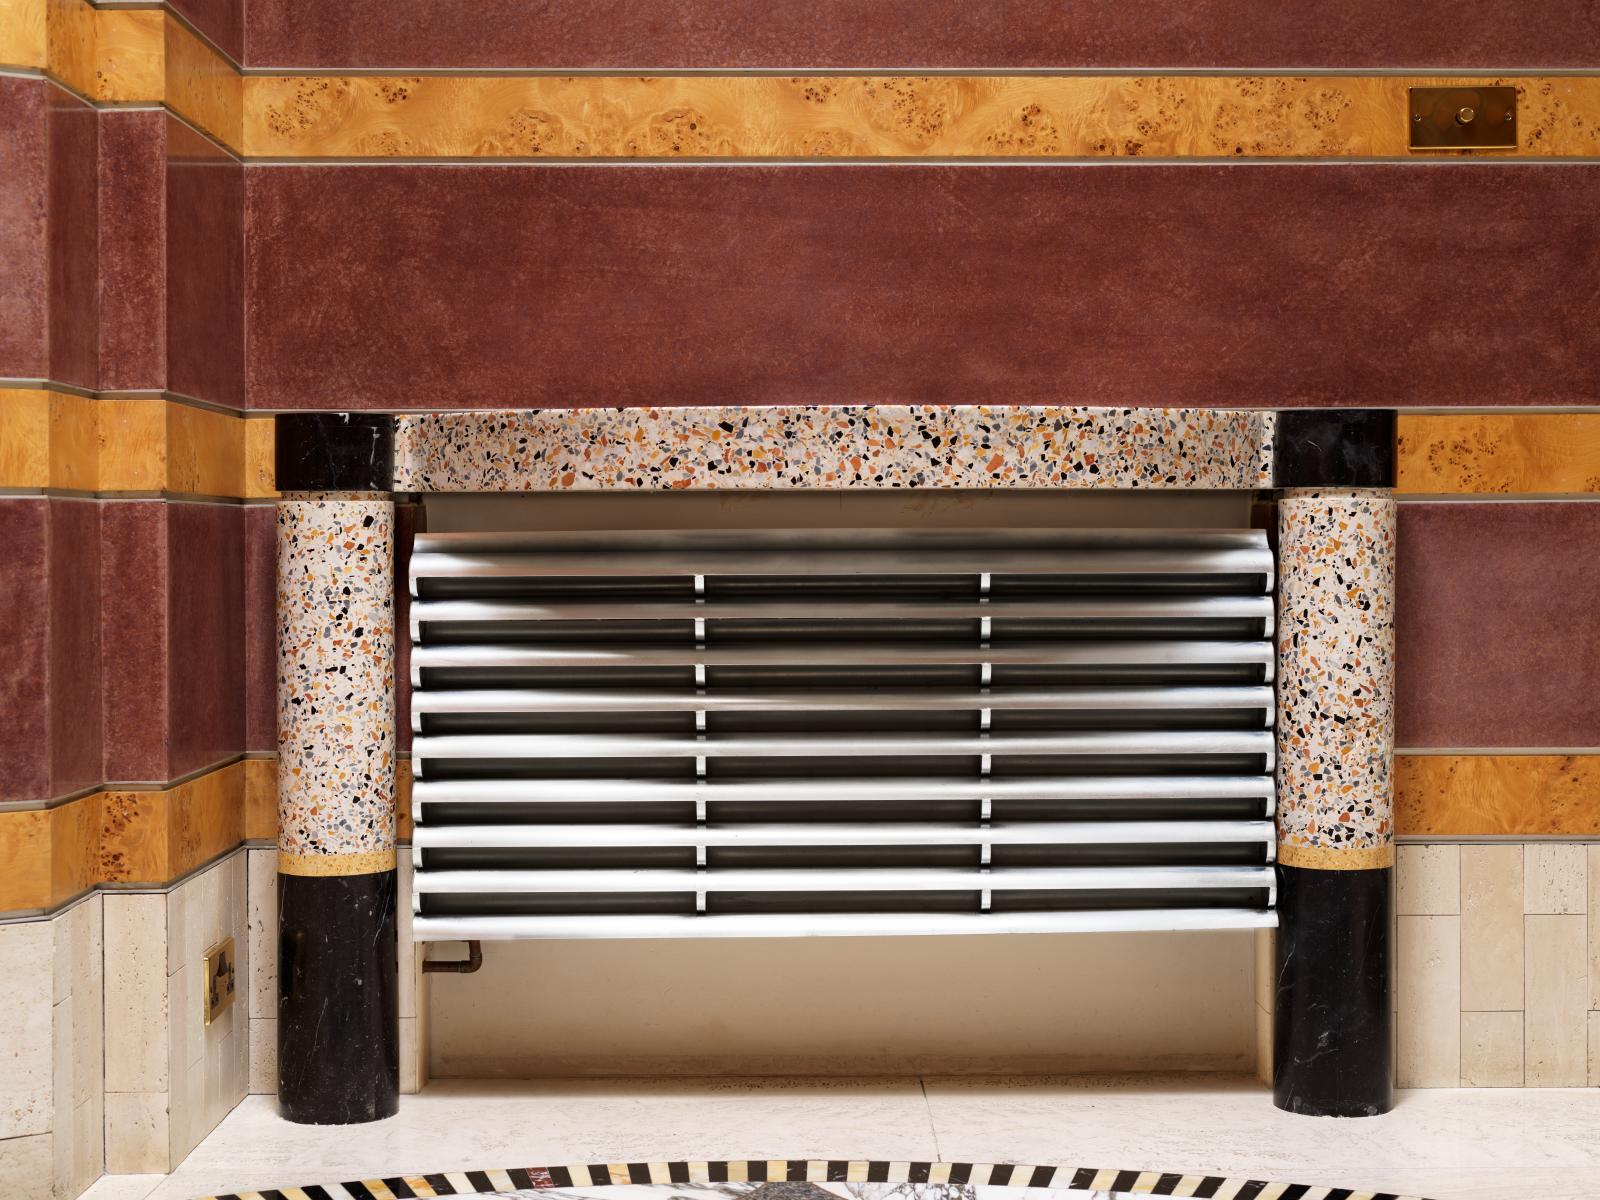 photograph showing detail of a radiator from John Outram's 1986 Wadhurst Park, Sussex